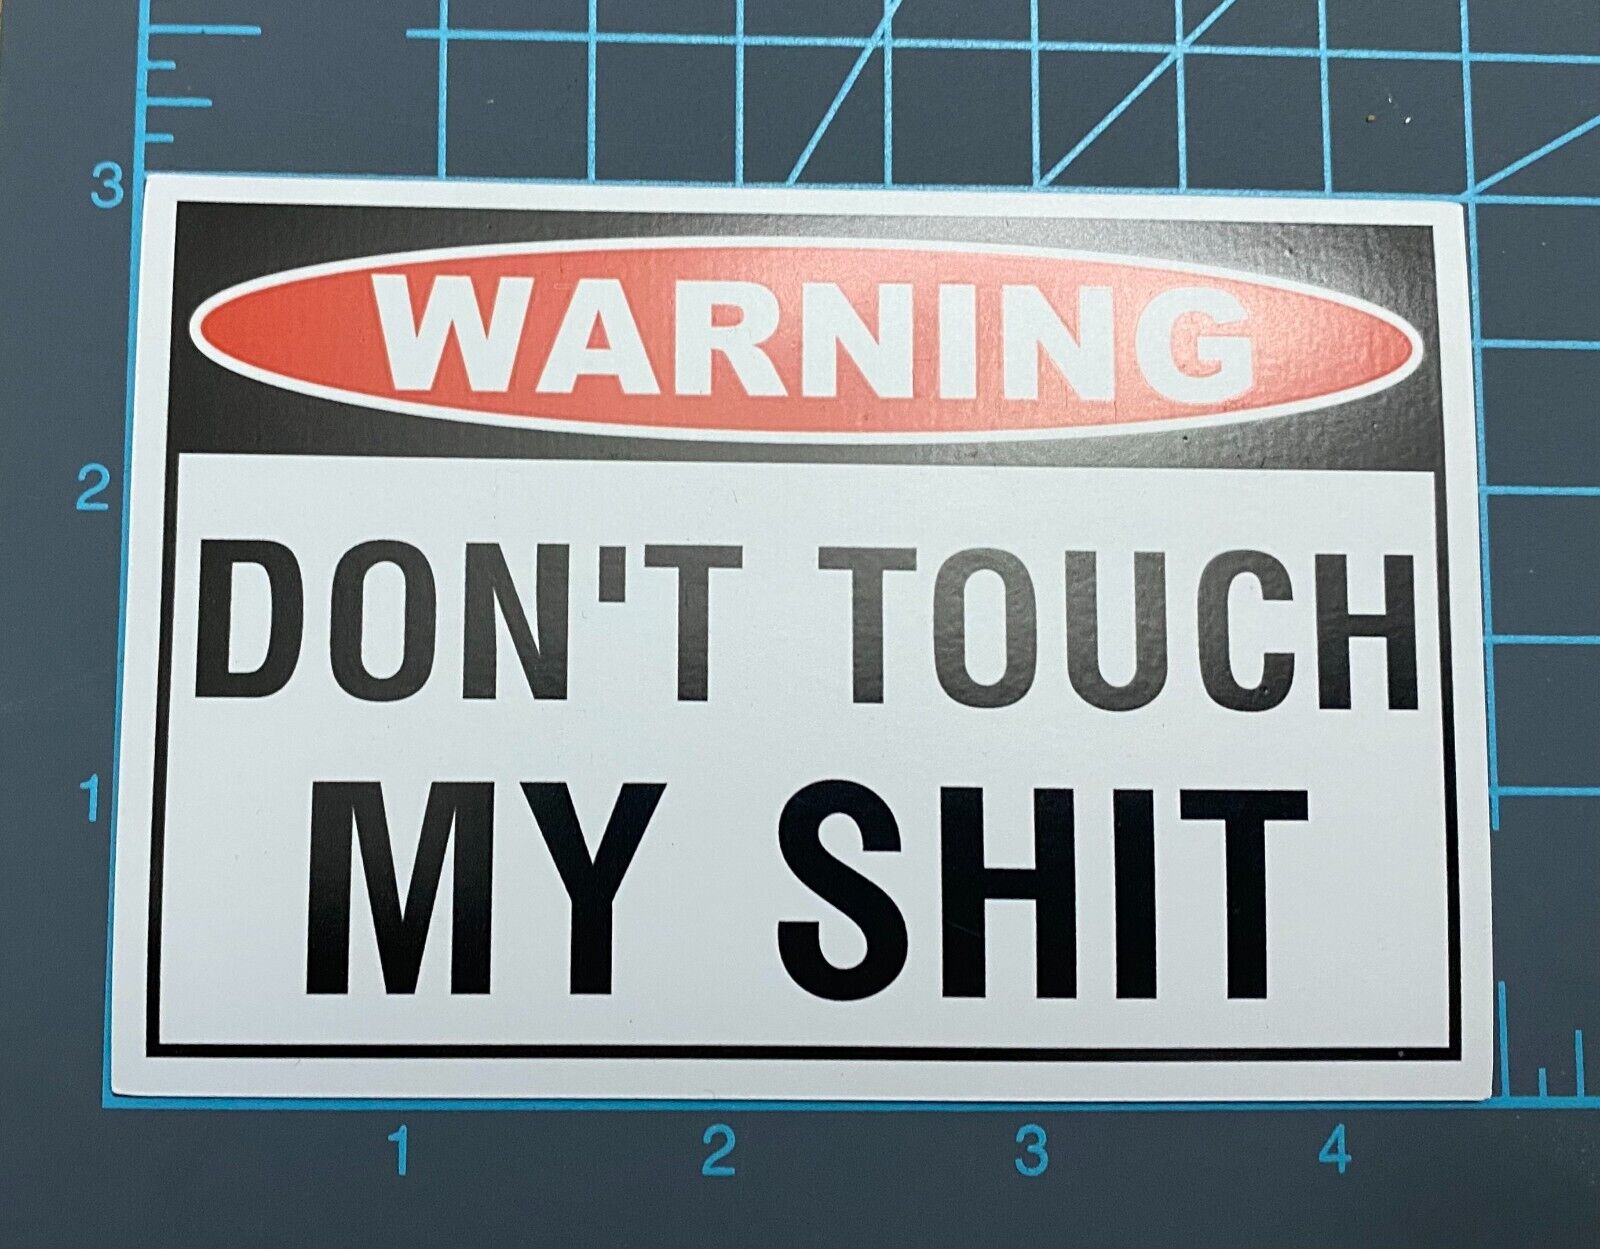 TOOLBOX TATTOO MAGNET REFRIDGE WARNING DONT TOUCH MY S*** M0093X5